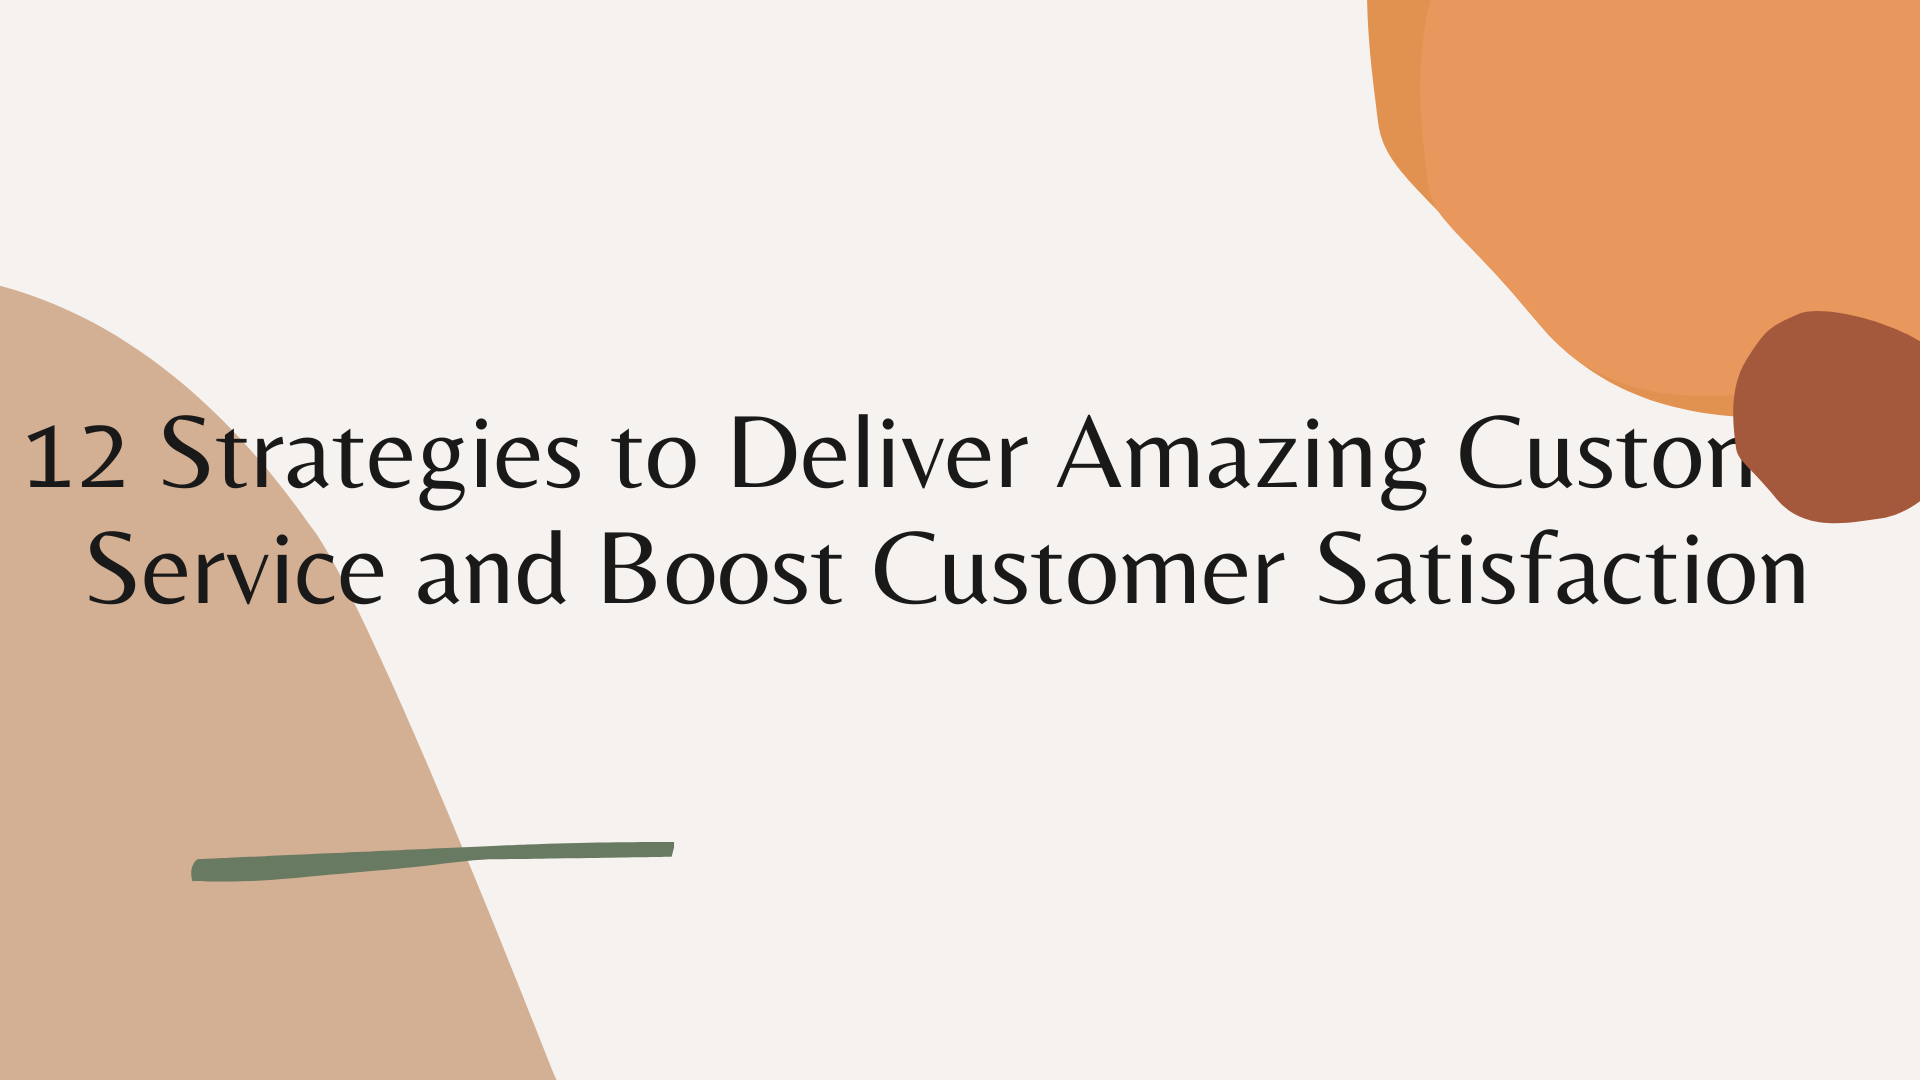 12 Strategies to Deliver Amazing Customer Service and Boost Customer Satisfaction